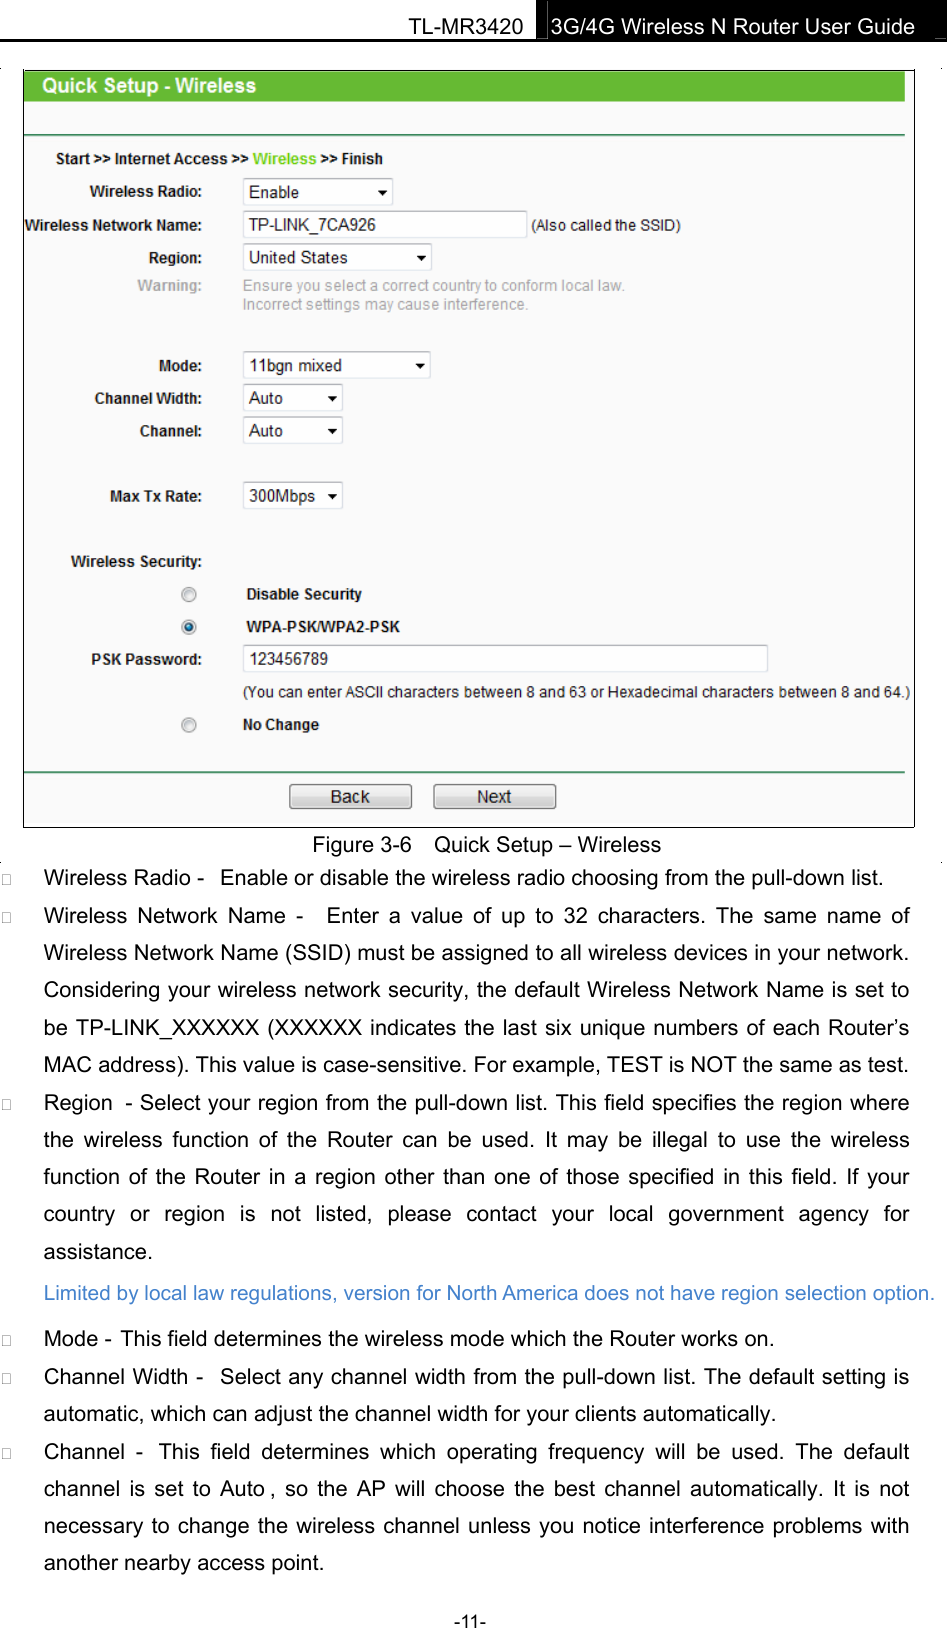 TL-MR34203G/4G Wireless N Router User Guide  Figure 3-6  Quick Setup – Wireless � Wireless Radio -  Enable or disable the wireless radio choosing from the pull-down list.   � Wireless  Network Name  -  Enter  a  value  of  up  to  32  characters.  The  same  name  of Wireless Network Name (SSID) must be assigned to all wireless devices in your network. Considering your wireless network security, the default Wireless Network Name is set to be TP-LINK_XXXXXX (XXXXXX indicates the last six unique numbers of each Router’s MAC address). This value is case-sensitive. For example, TEST is NOT the same as test. � Region  - Select your region from the pull-down list. This field specifies the region where the  wireless  function  of  the  Router  can  be  used.  It  may  be  illegal  to  use  the  wireless function of the Router in a region other than one of those specified  in this field. If your country  or  region  is  not  listed,  please  contact  your  local government  agency  for assistance. � Mode - This field determines the wireless mode which the Router works on. � Channel Width -  Select any channel width from the pull-down list. The default setting is automatic, which can adjust the channel width for your clients automatically. � Channel  -  This  field  determines  which  operating  frequency  will  be  used.  The  default channel  is  set to Auto ,  so  the AP will  choose  the  best  channel  automatically.  It  is  not necessary to change the wireless channel unless you notice interference problems with another nearby access point. -11- Limited by local law regulations, version for North America does not have region selection option. 